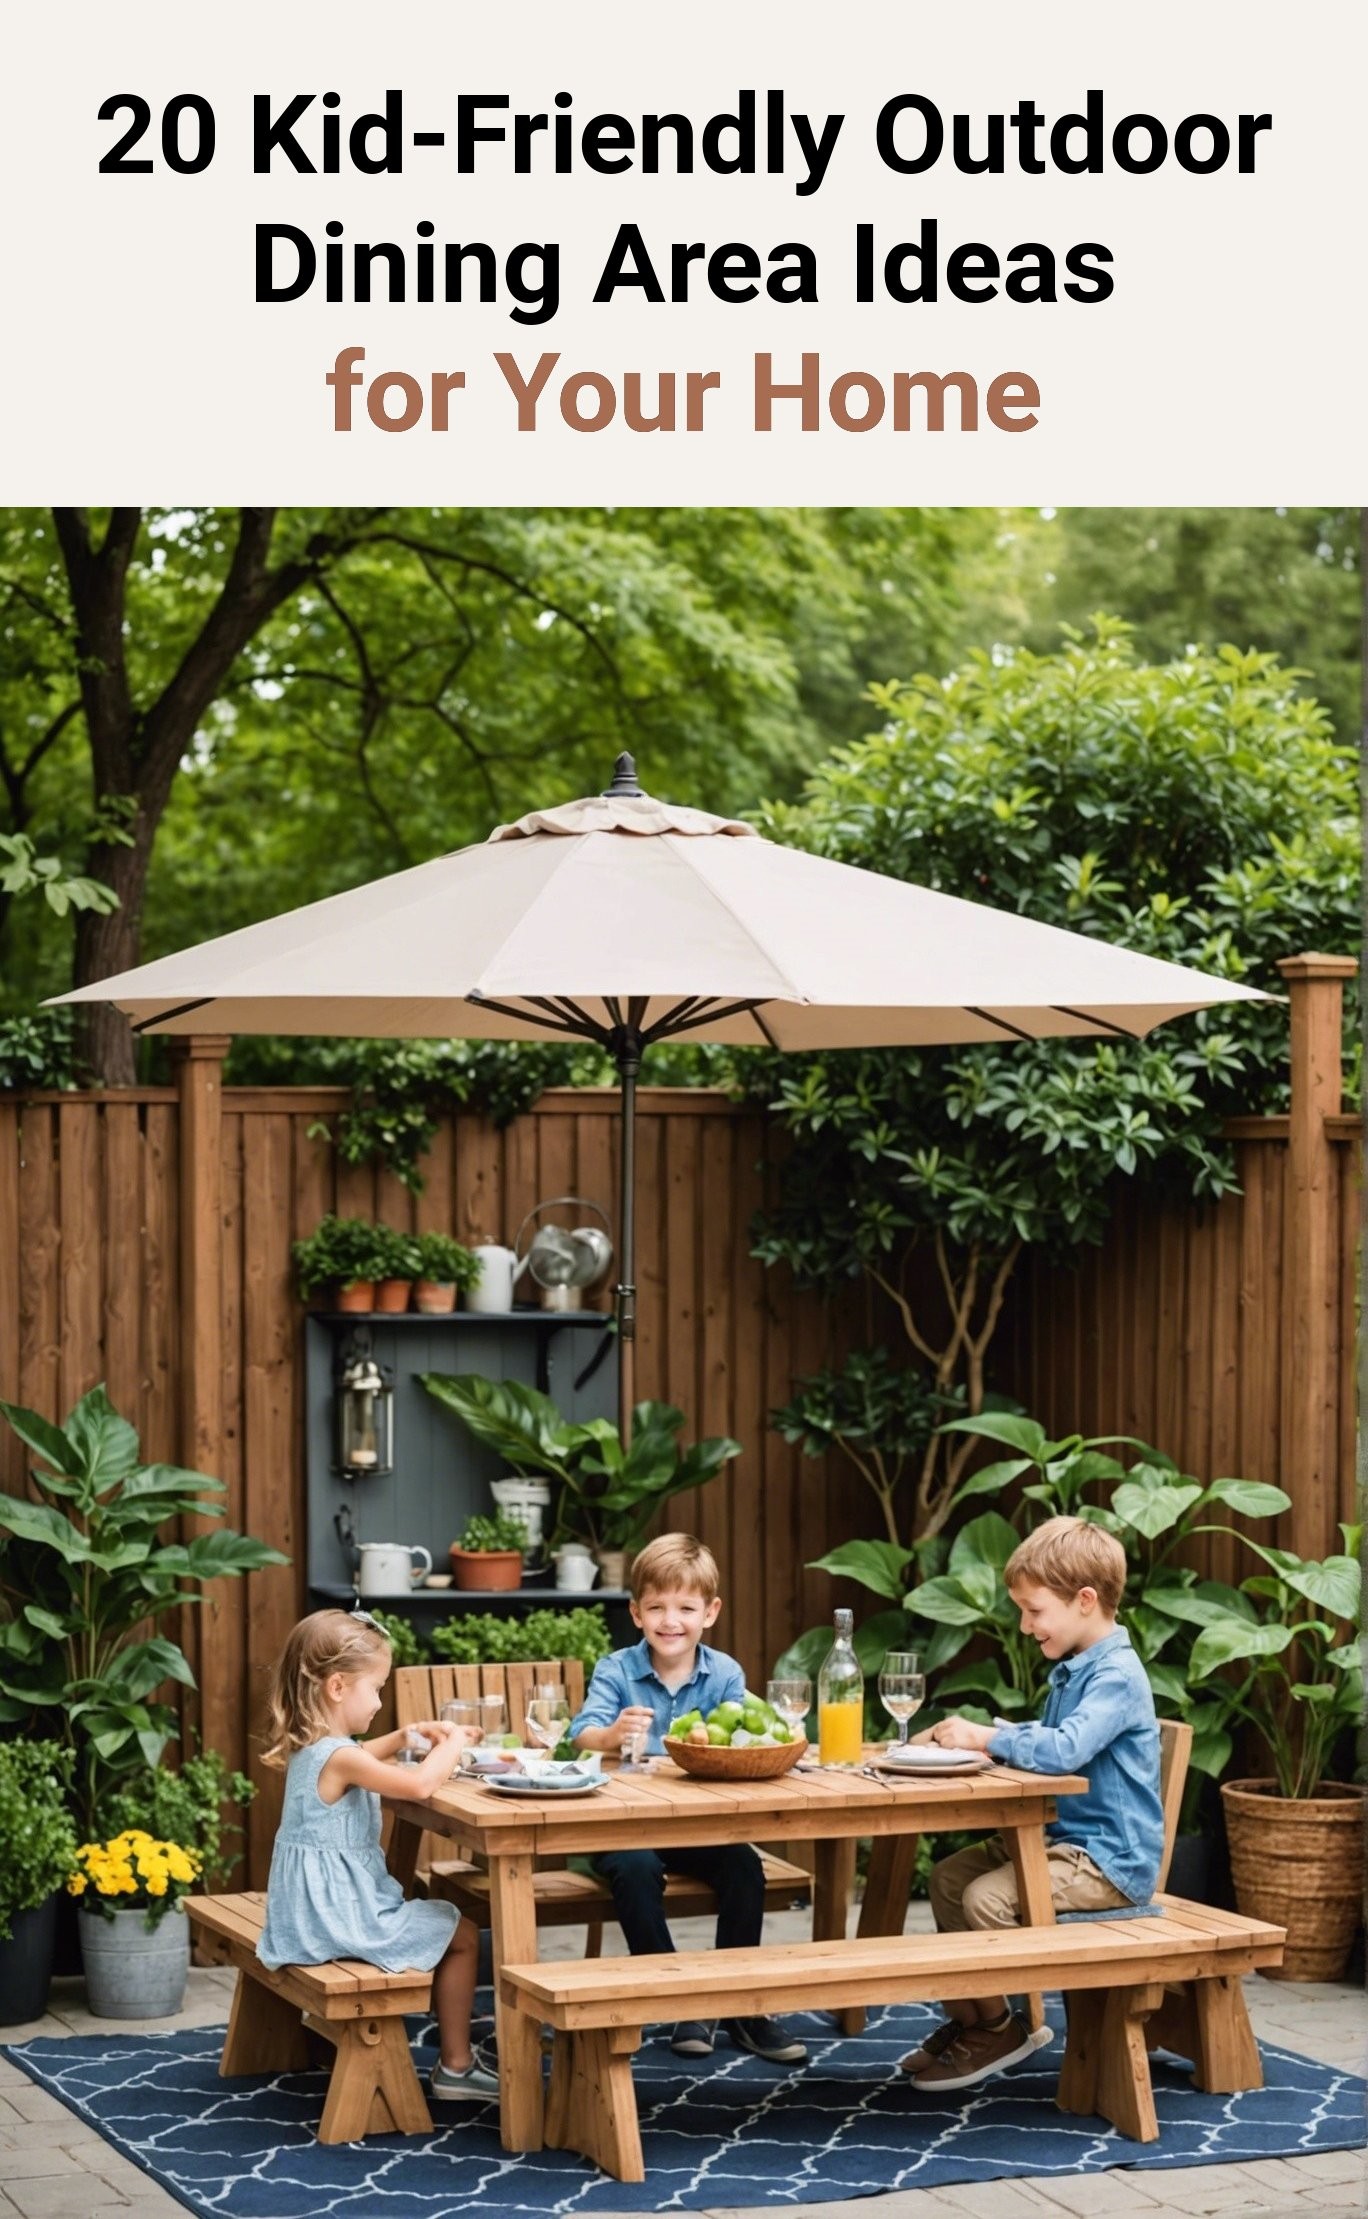 20 Kid-Friendly Outdoor Dining Area Ideas for Your Home